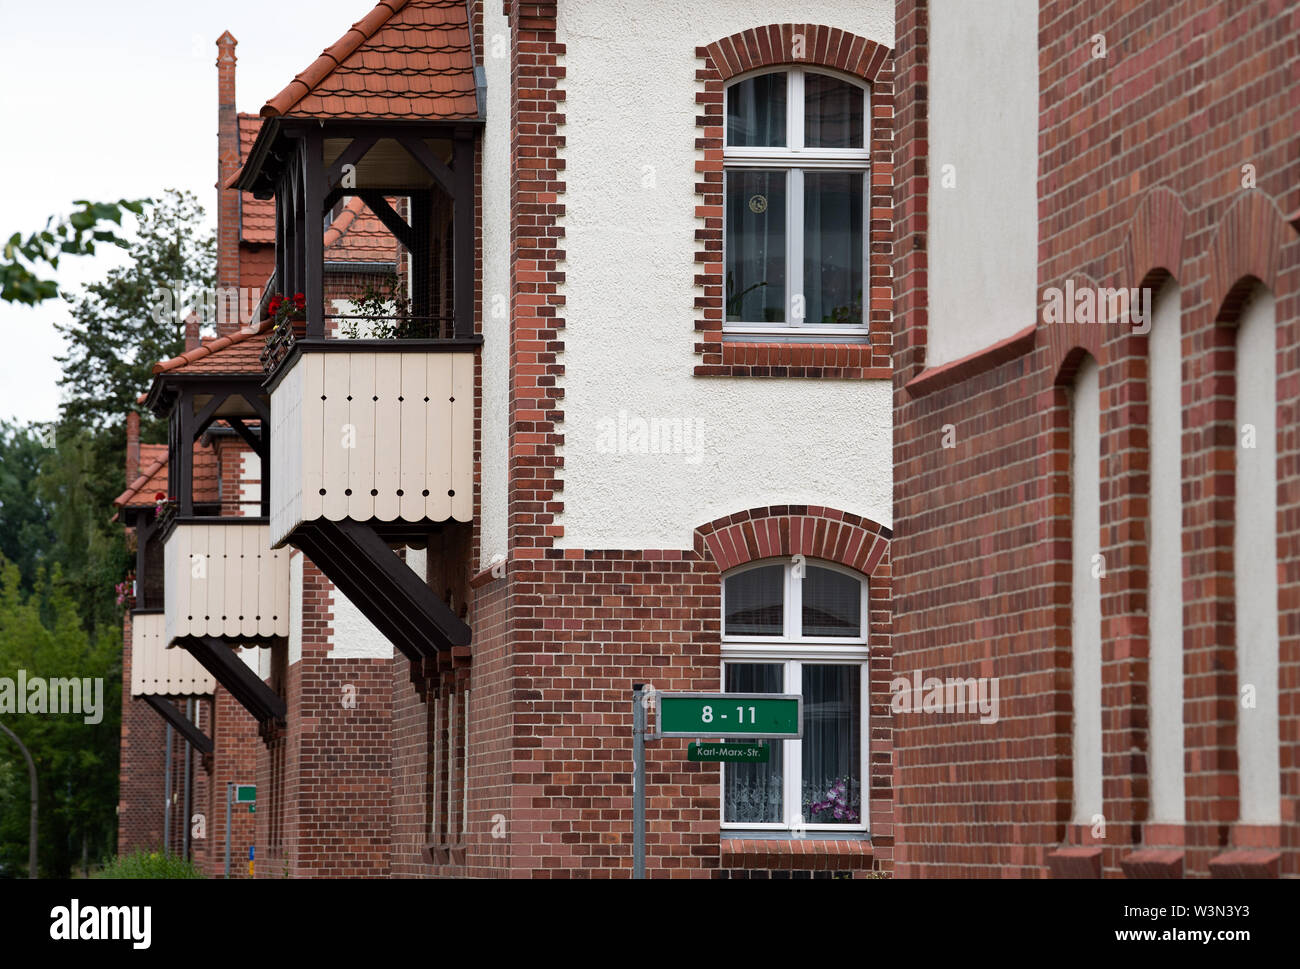 Works Housing Estate High Resolution Stock Photography and Images - Alamy